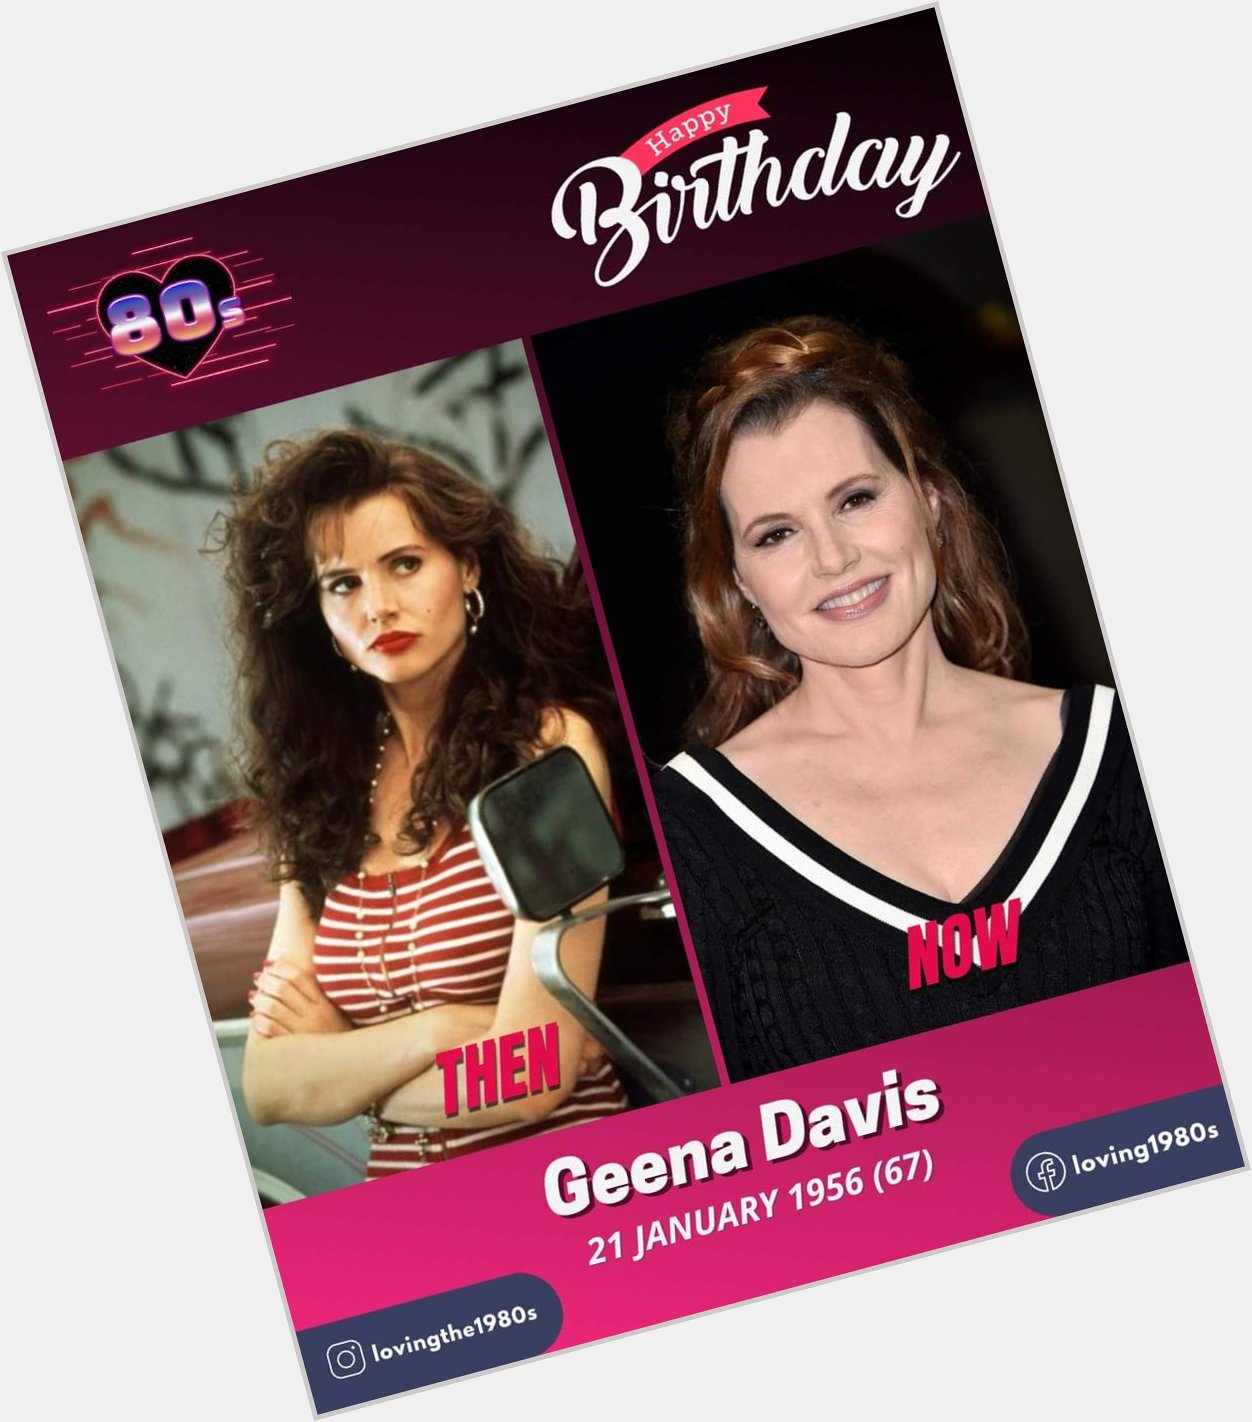 Happy Birthday Geena Davis. My best Wishes for you.  Greetings from Germany  